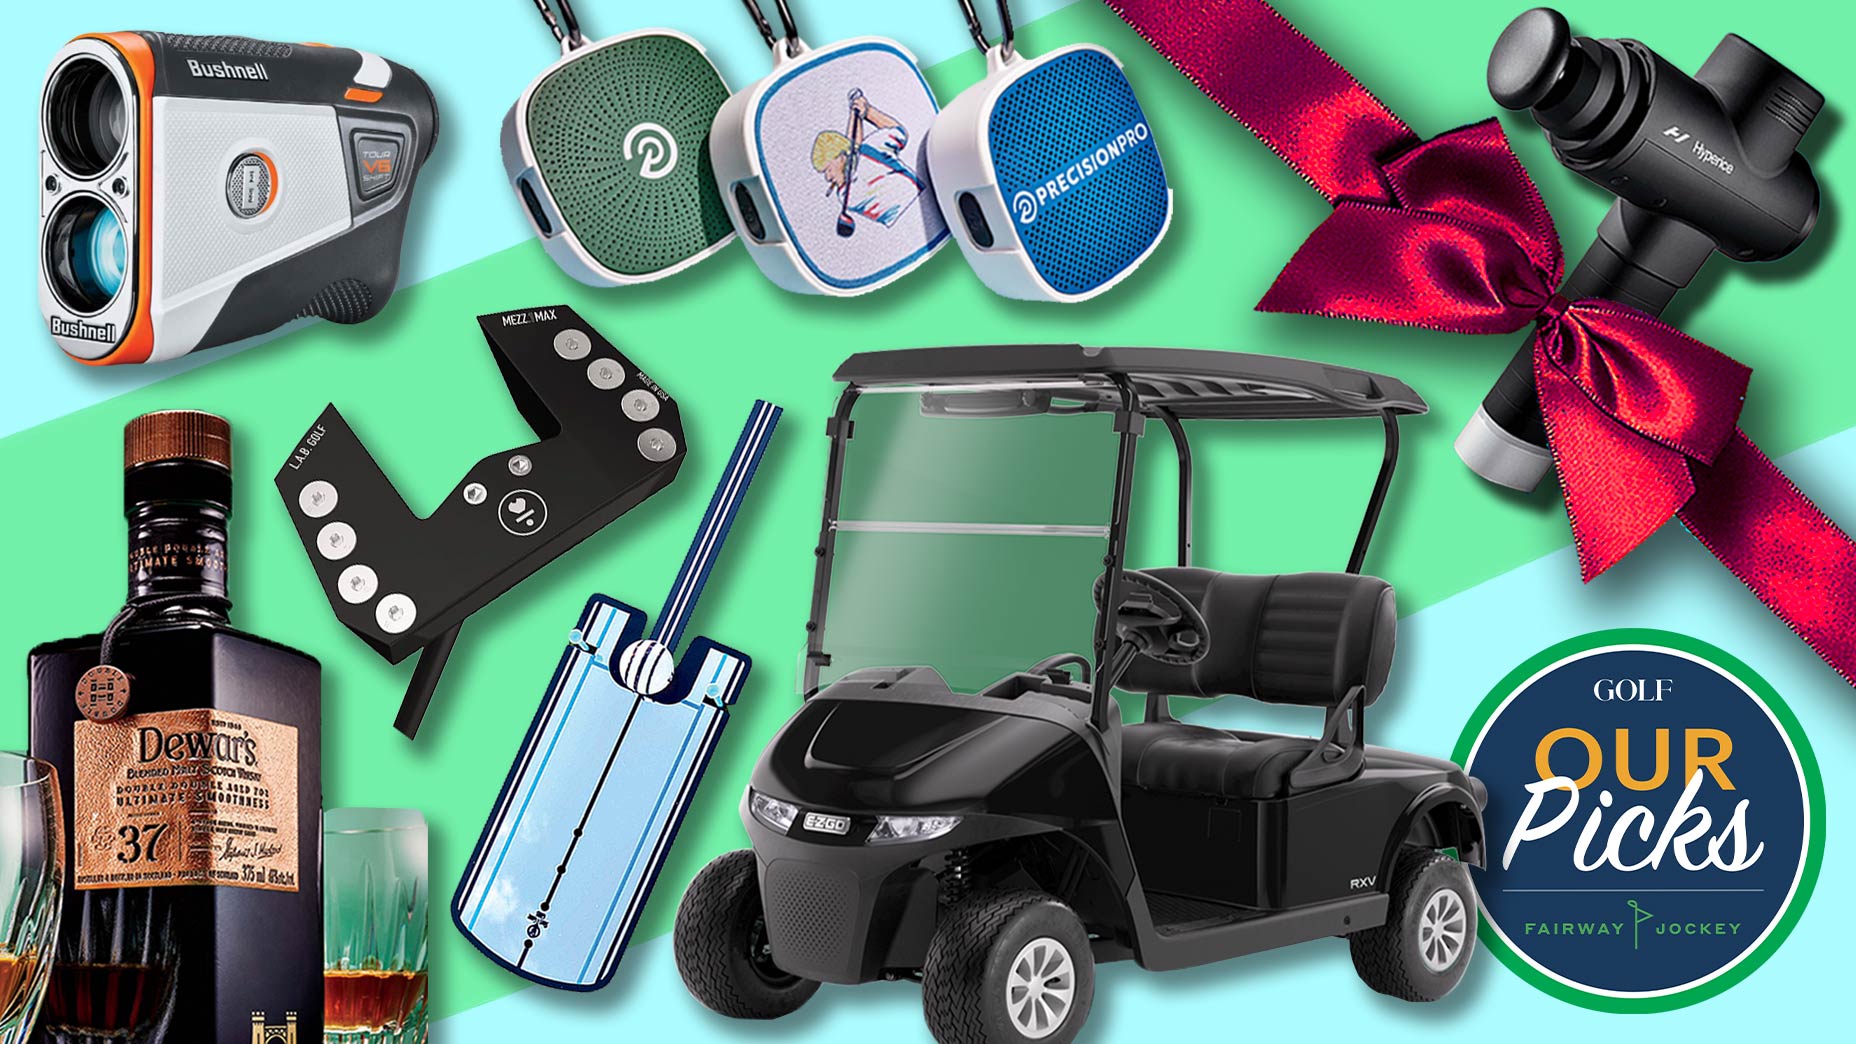 75 Best Golf Gifts 2023 - Top Gift Ideas for Golfers